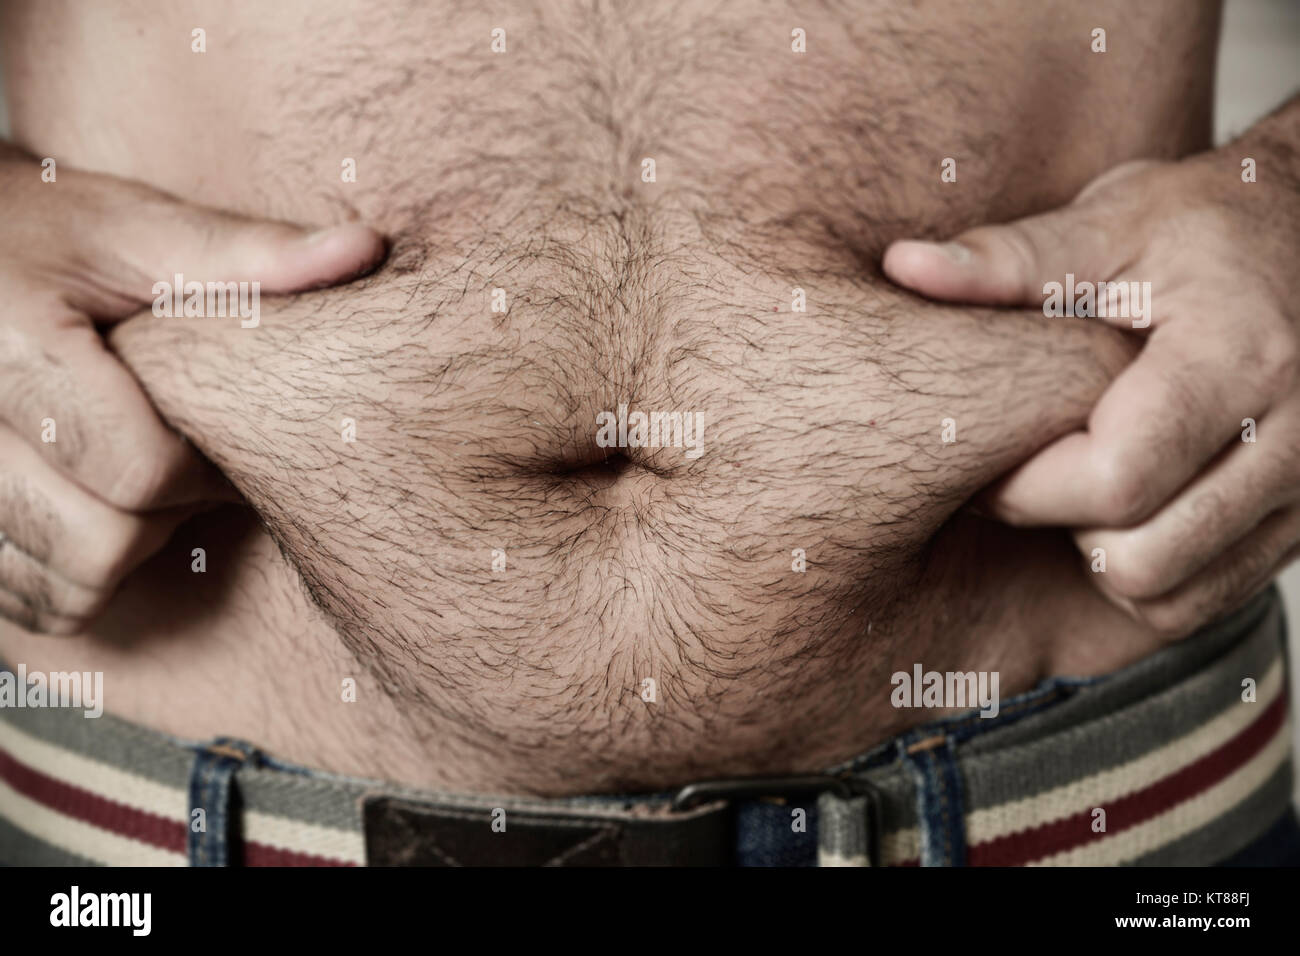 closeup of a young caucasian man grabbing the fat of his hairy stomach Stoc...